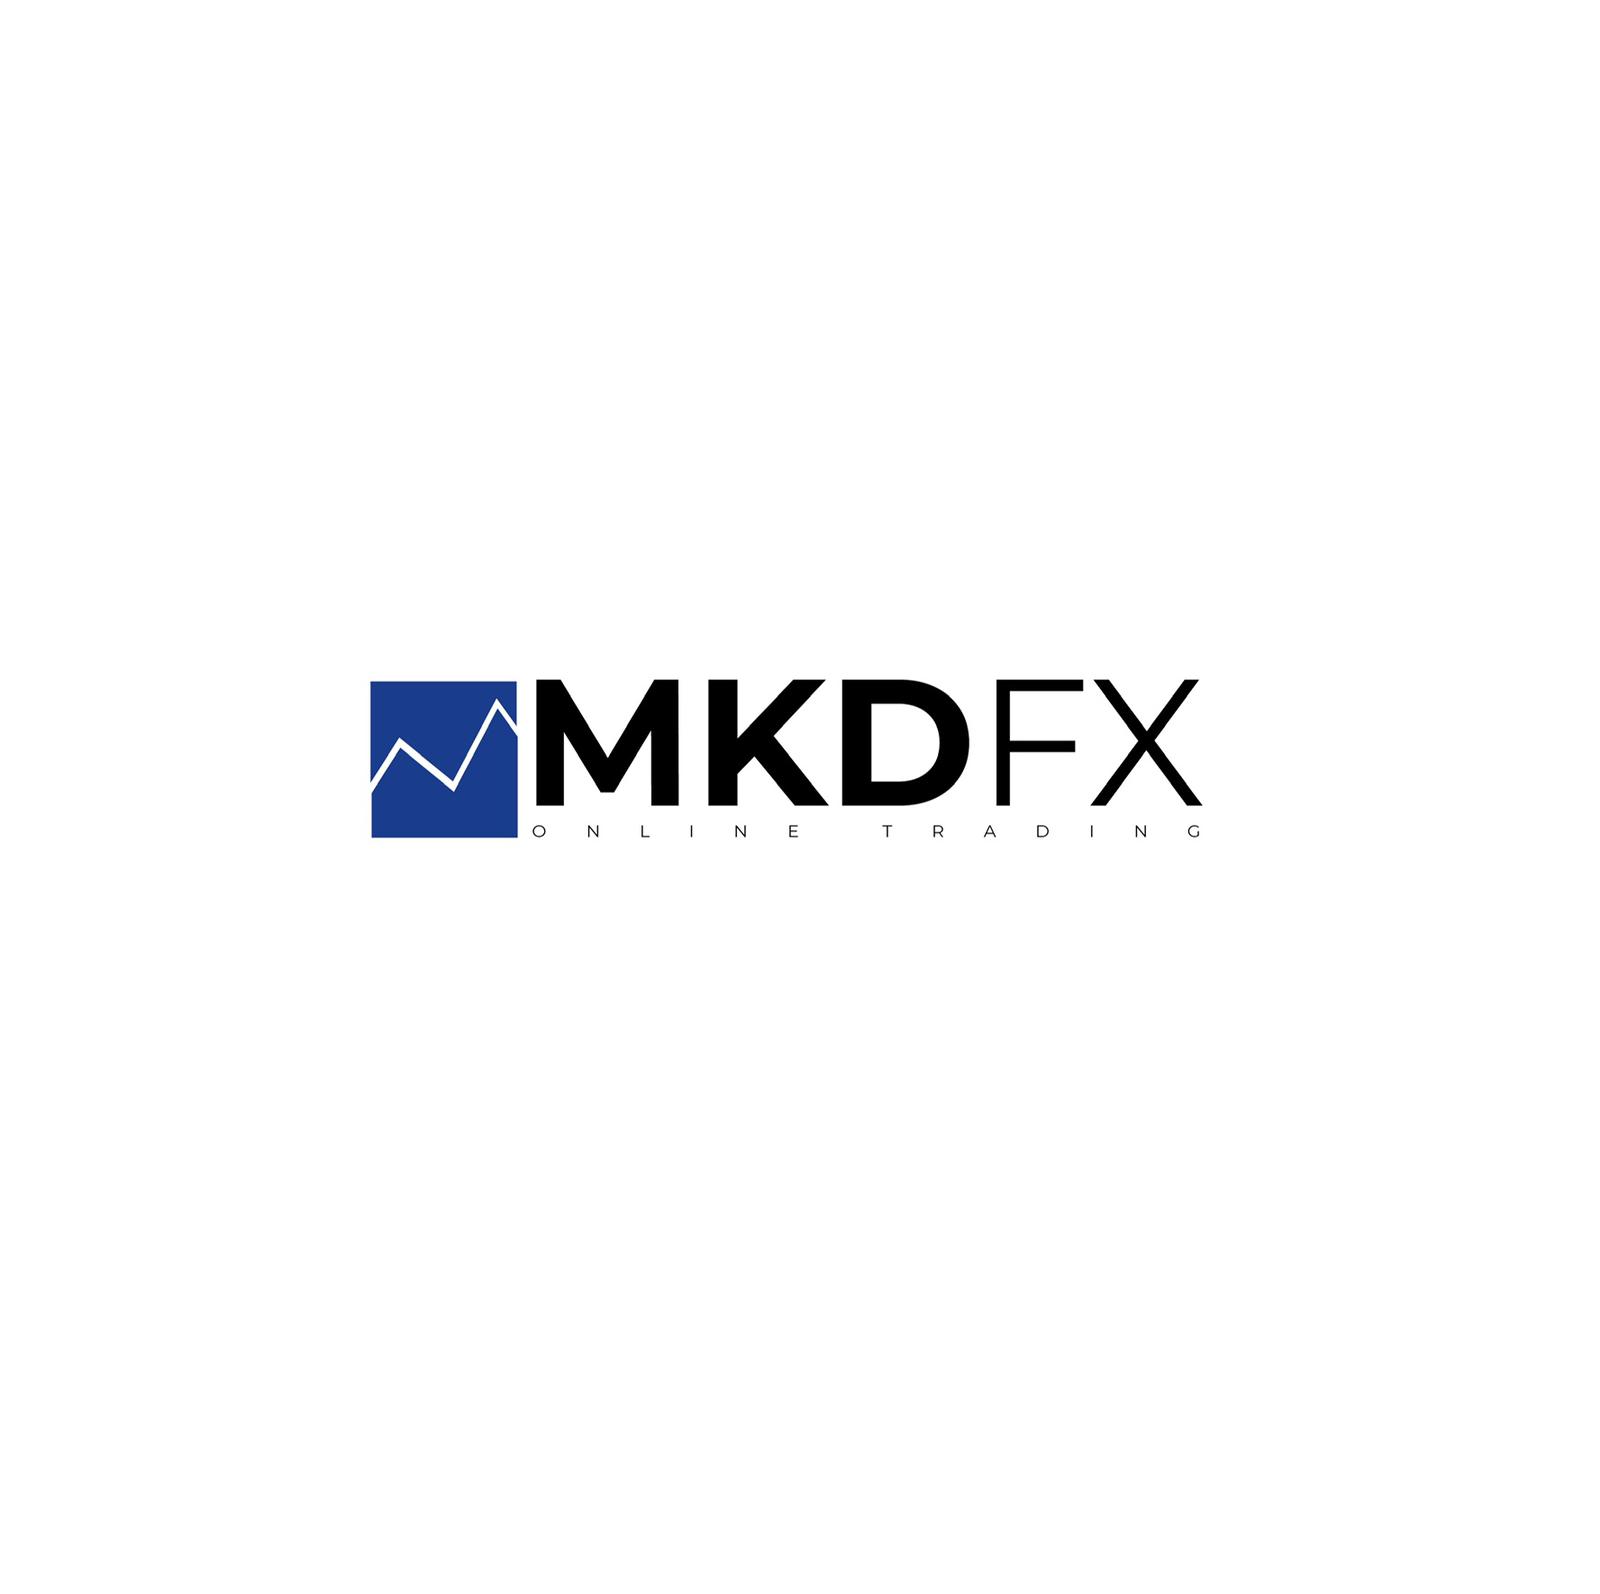 MKD FX : A vogue in online trading